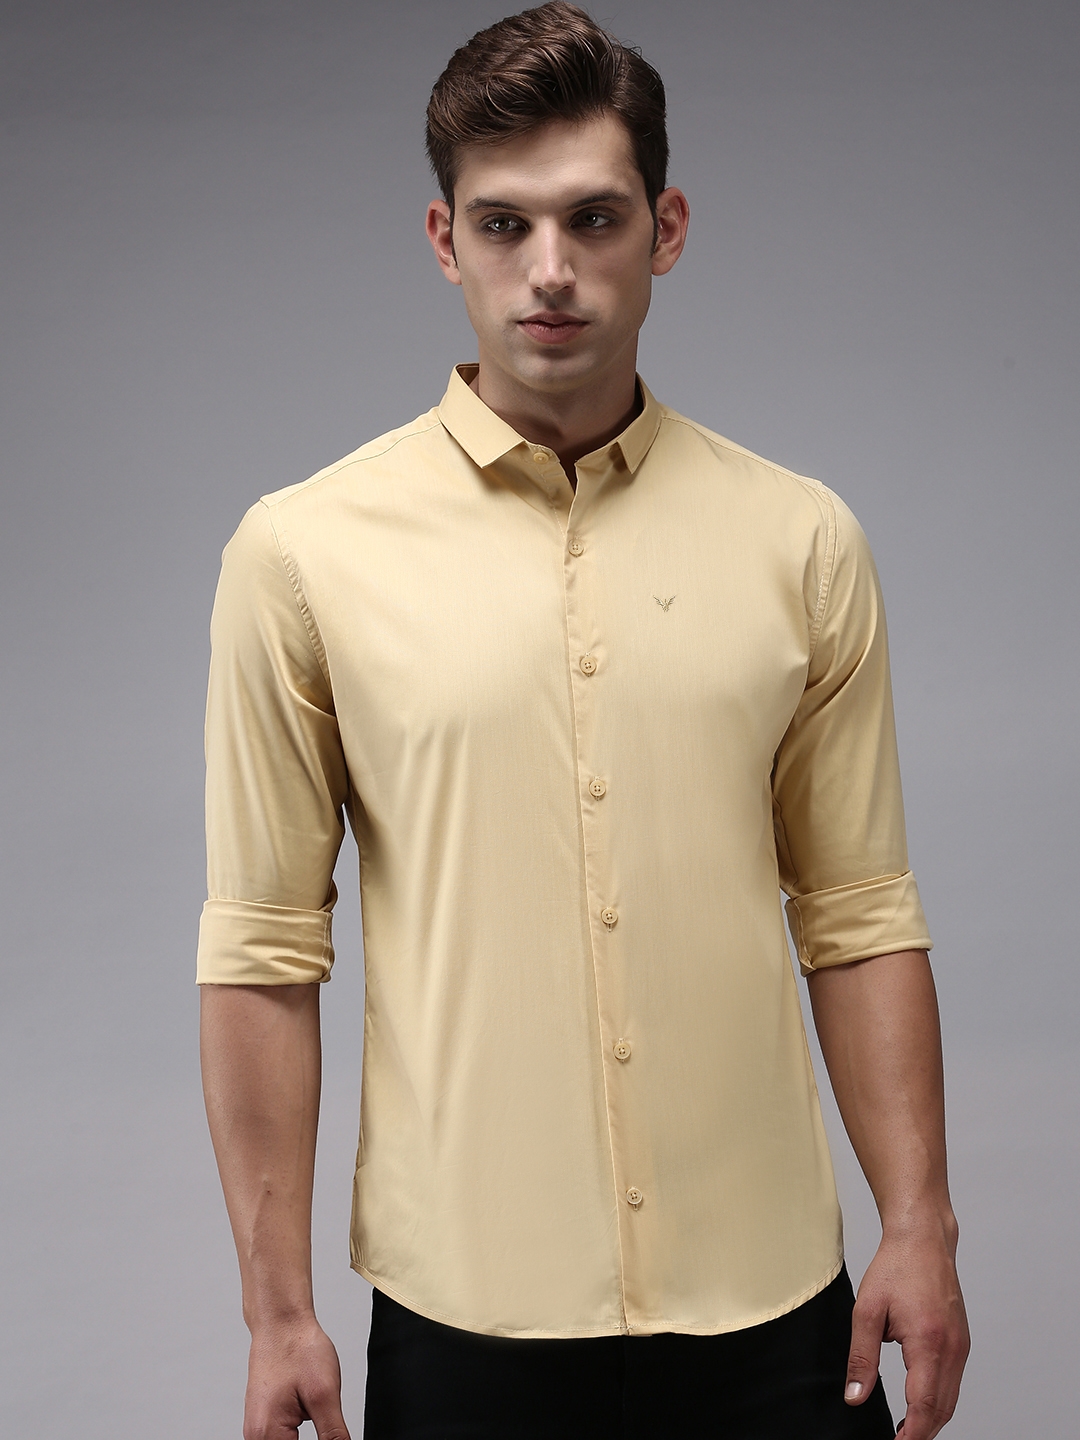 Showoff | SHOWOFF Men's Yellow Spread Collar Solid Comfort Fit Shirt